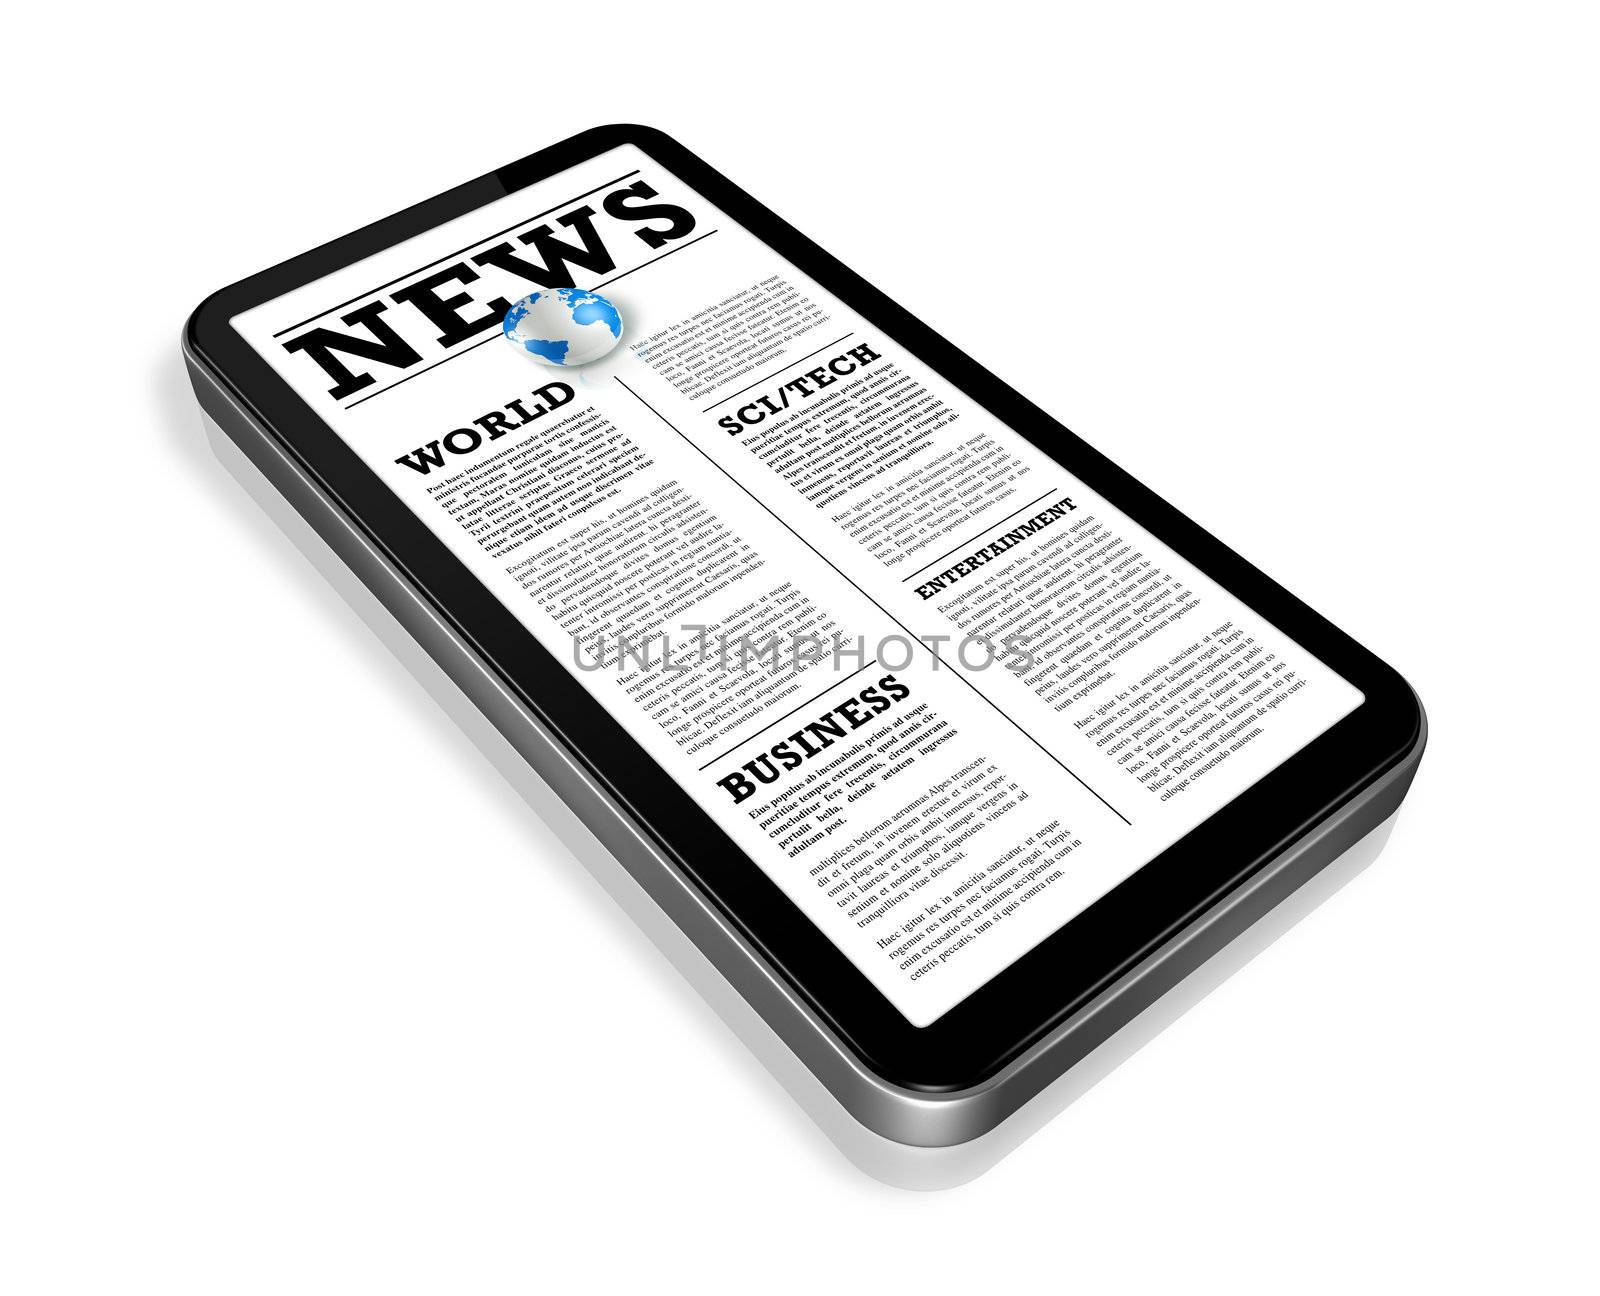 News on a mobile phone isolated on white with 2 clipping paths : one for global scene and one for the screen